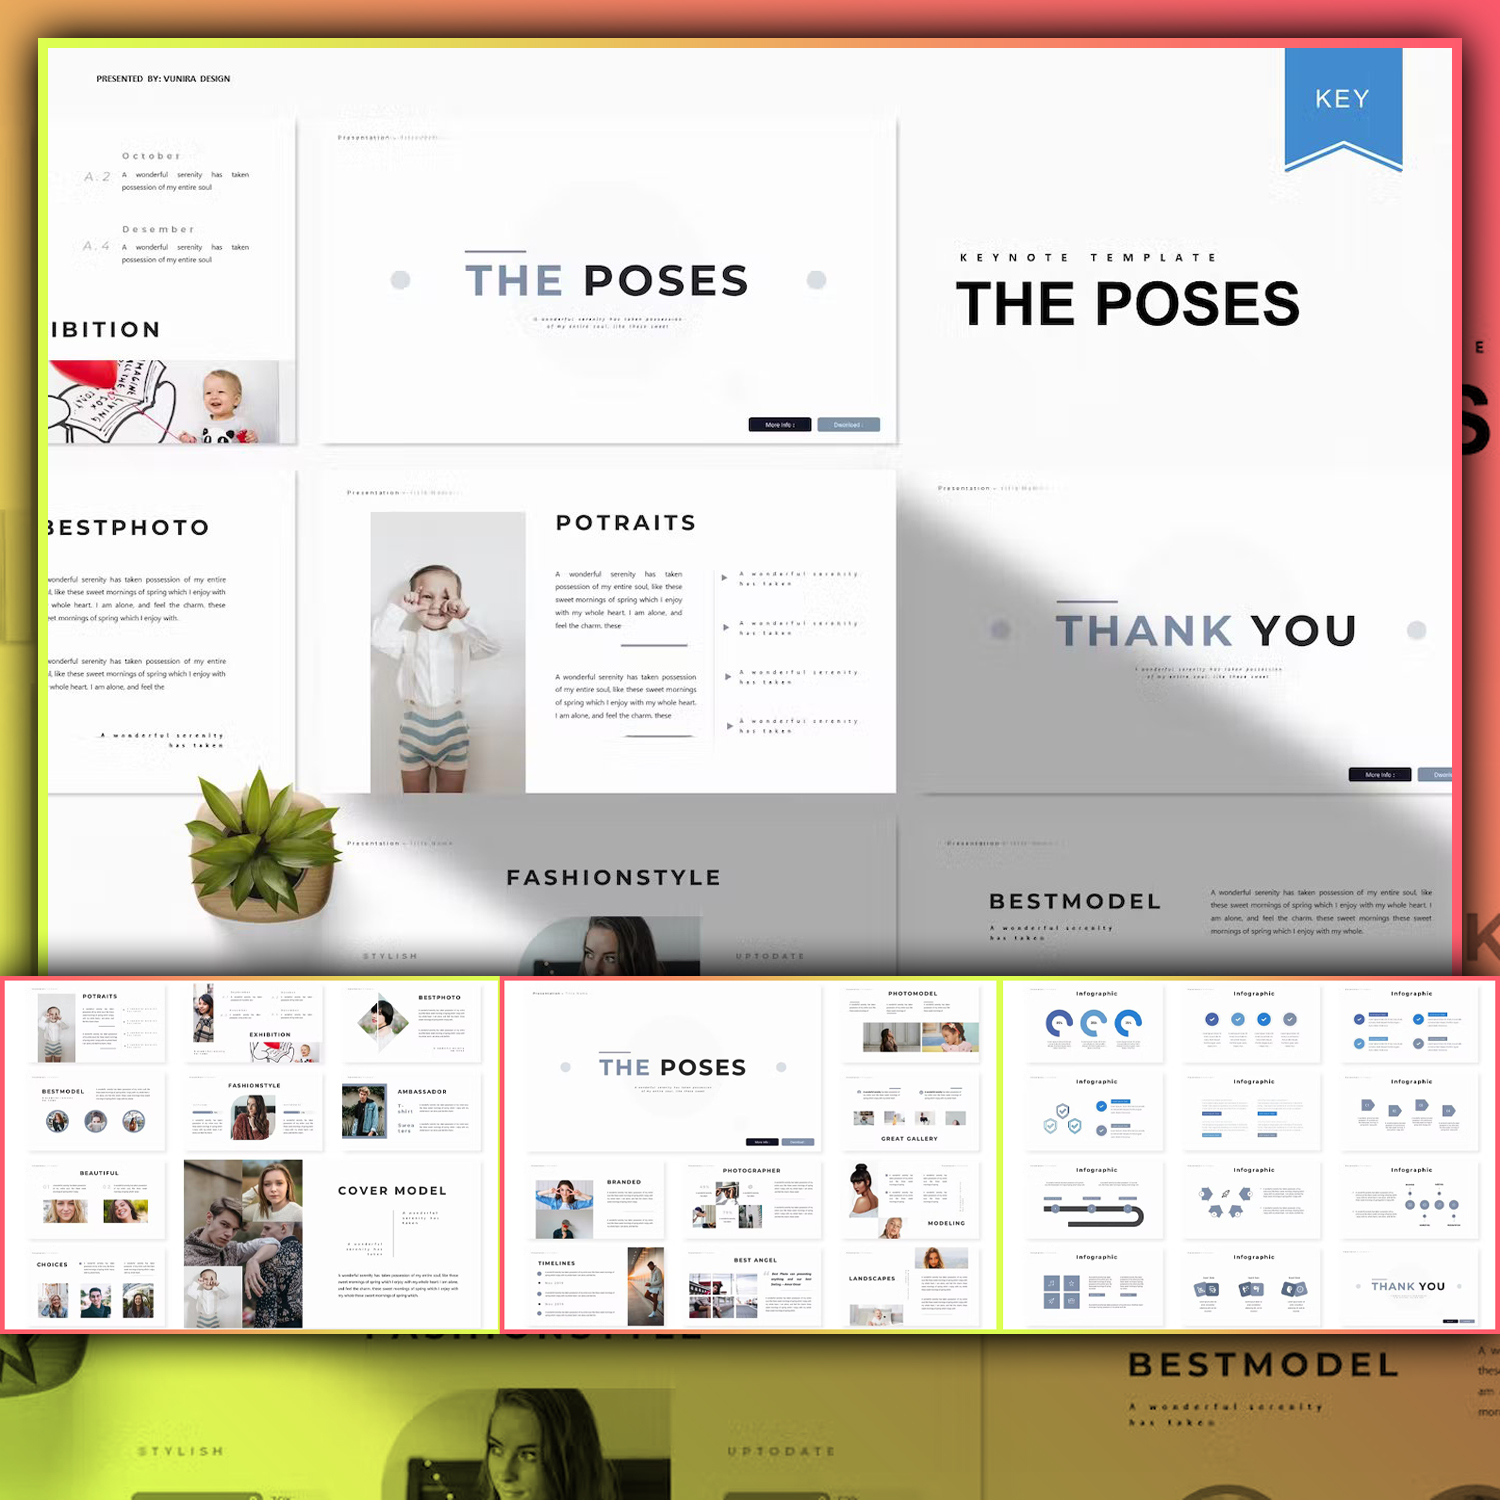 The Poses | Keynote Template.